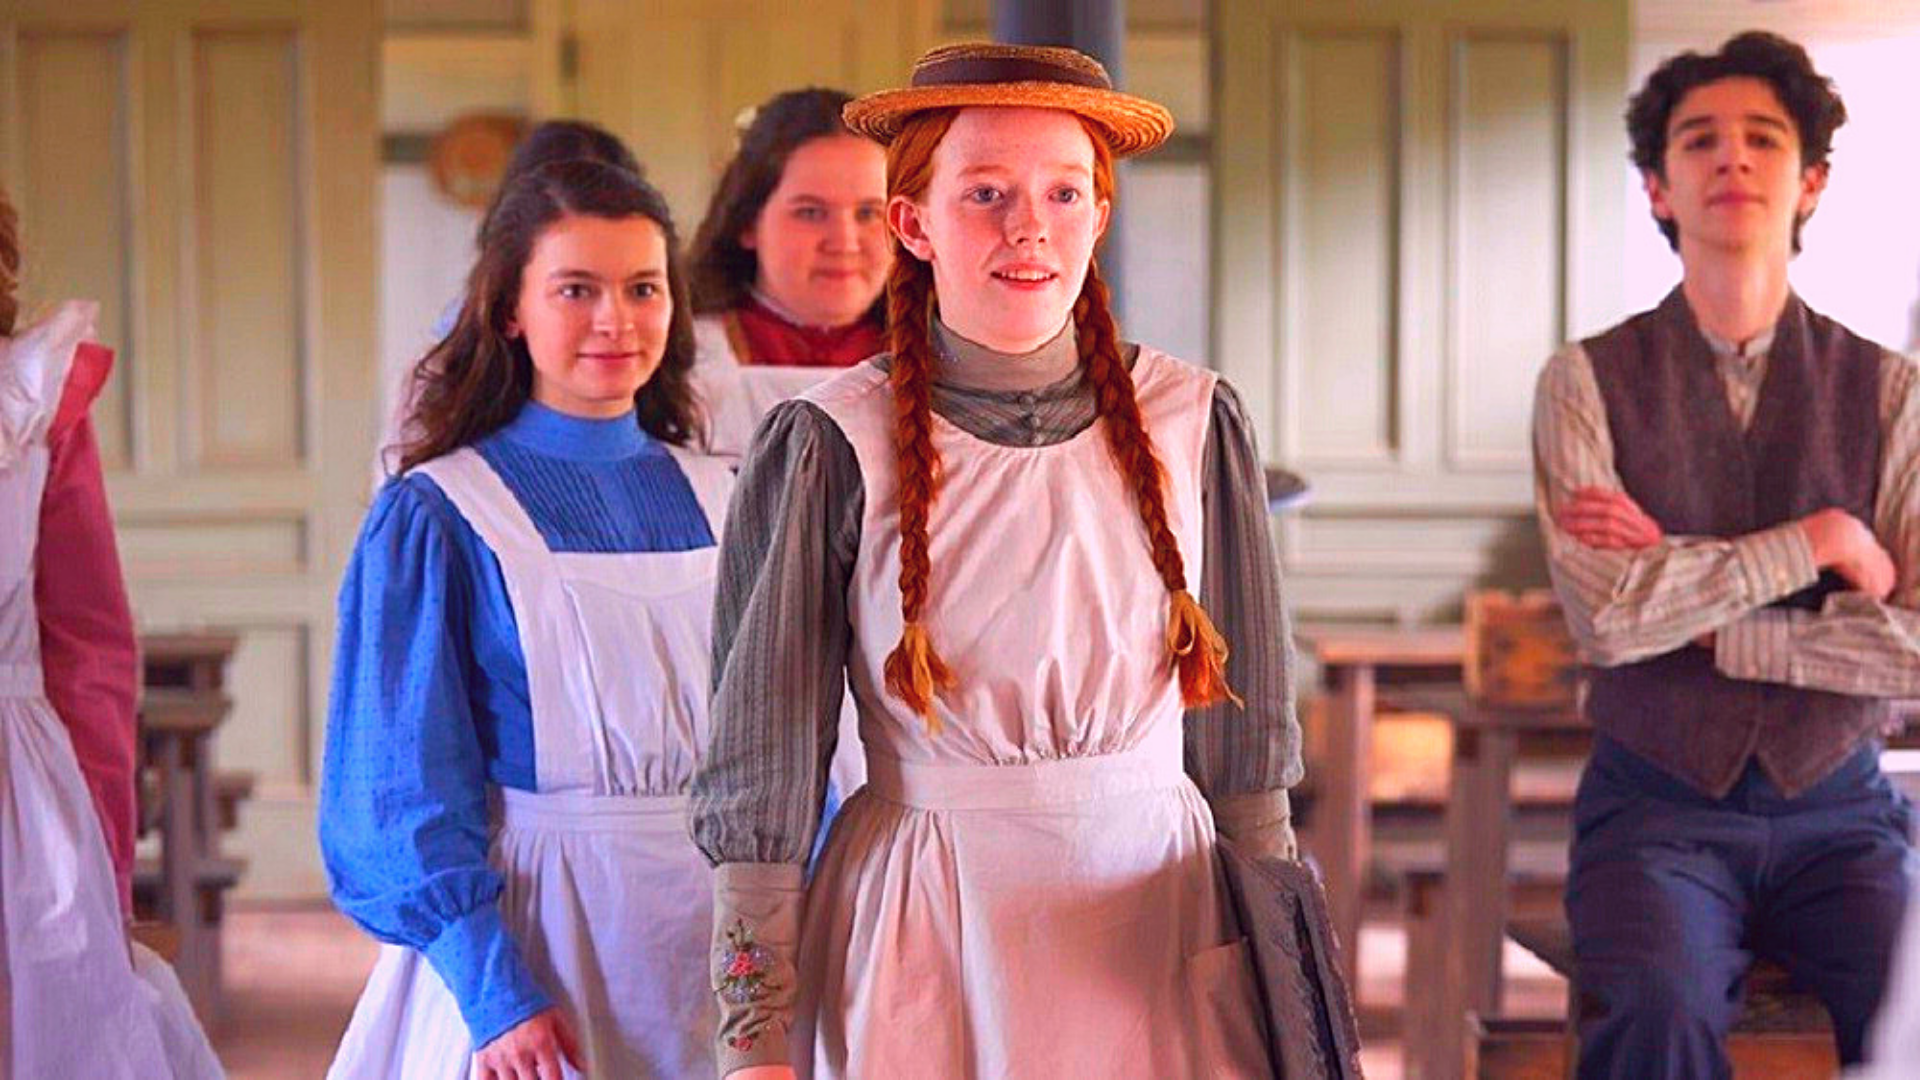 Anne with an E- When is it releasing ?is it renewed or is it cancelled ?tap to know cast, plot and more